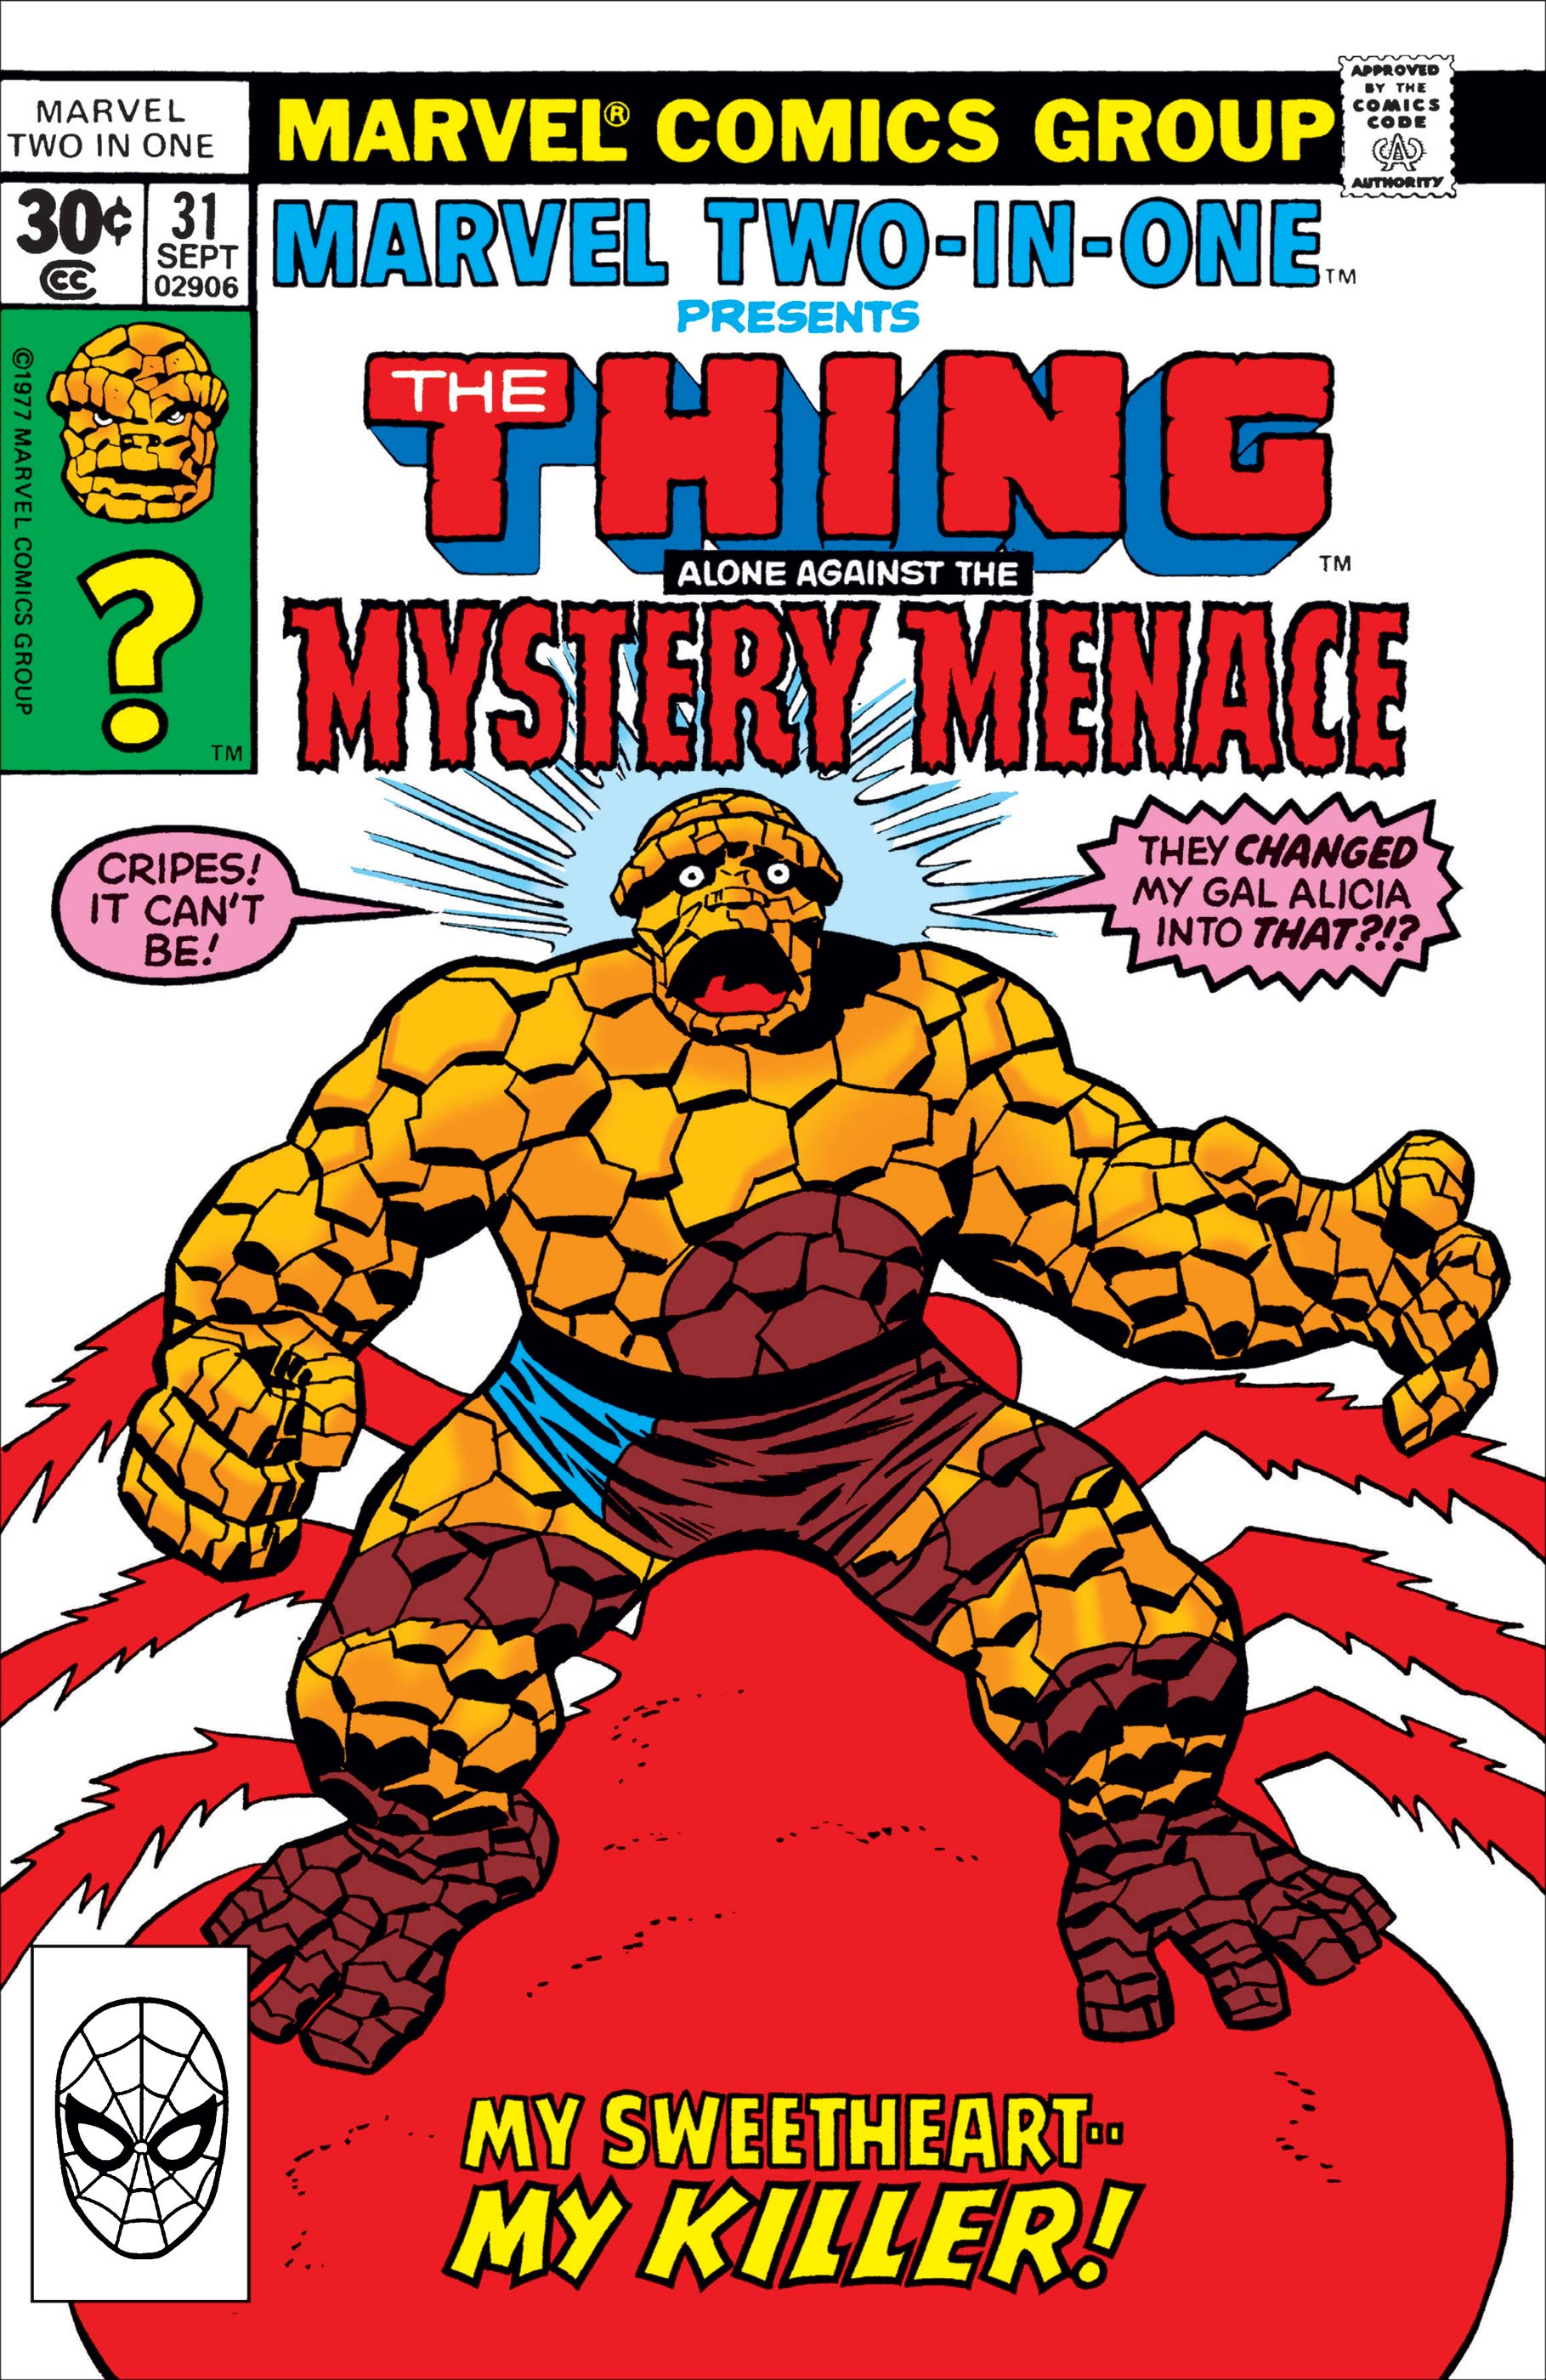 Marvel Two-in-One (1974) #31